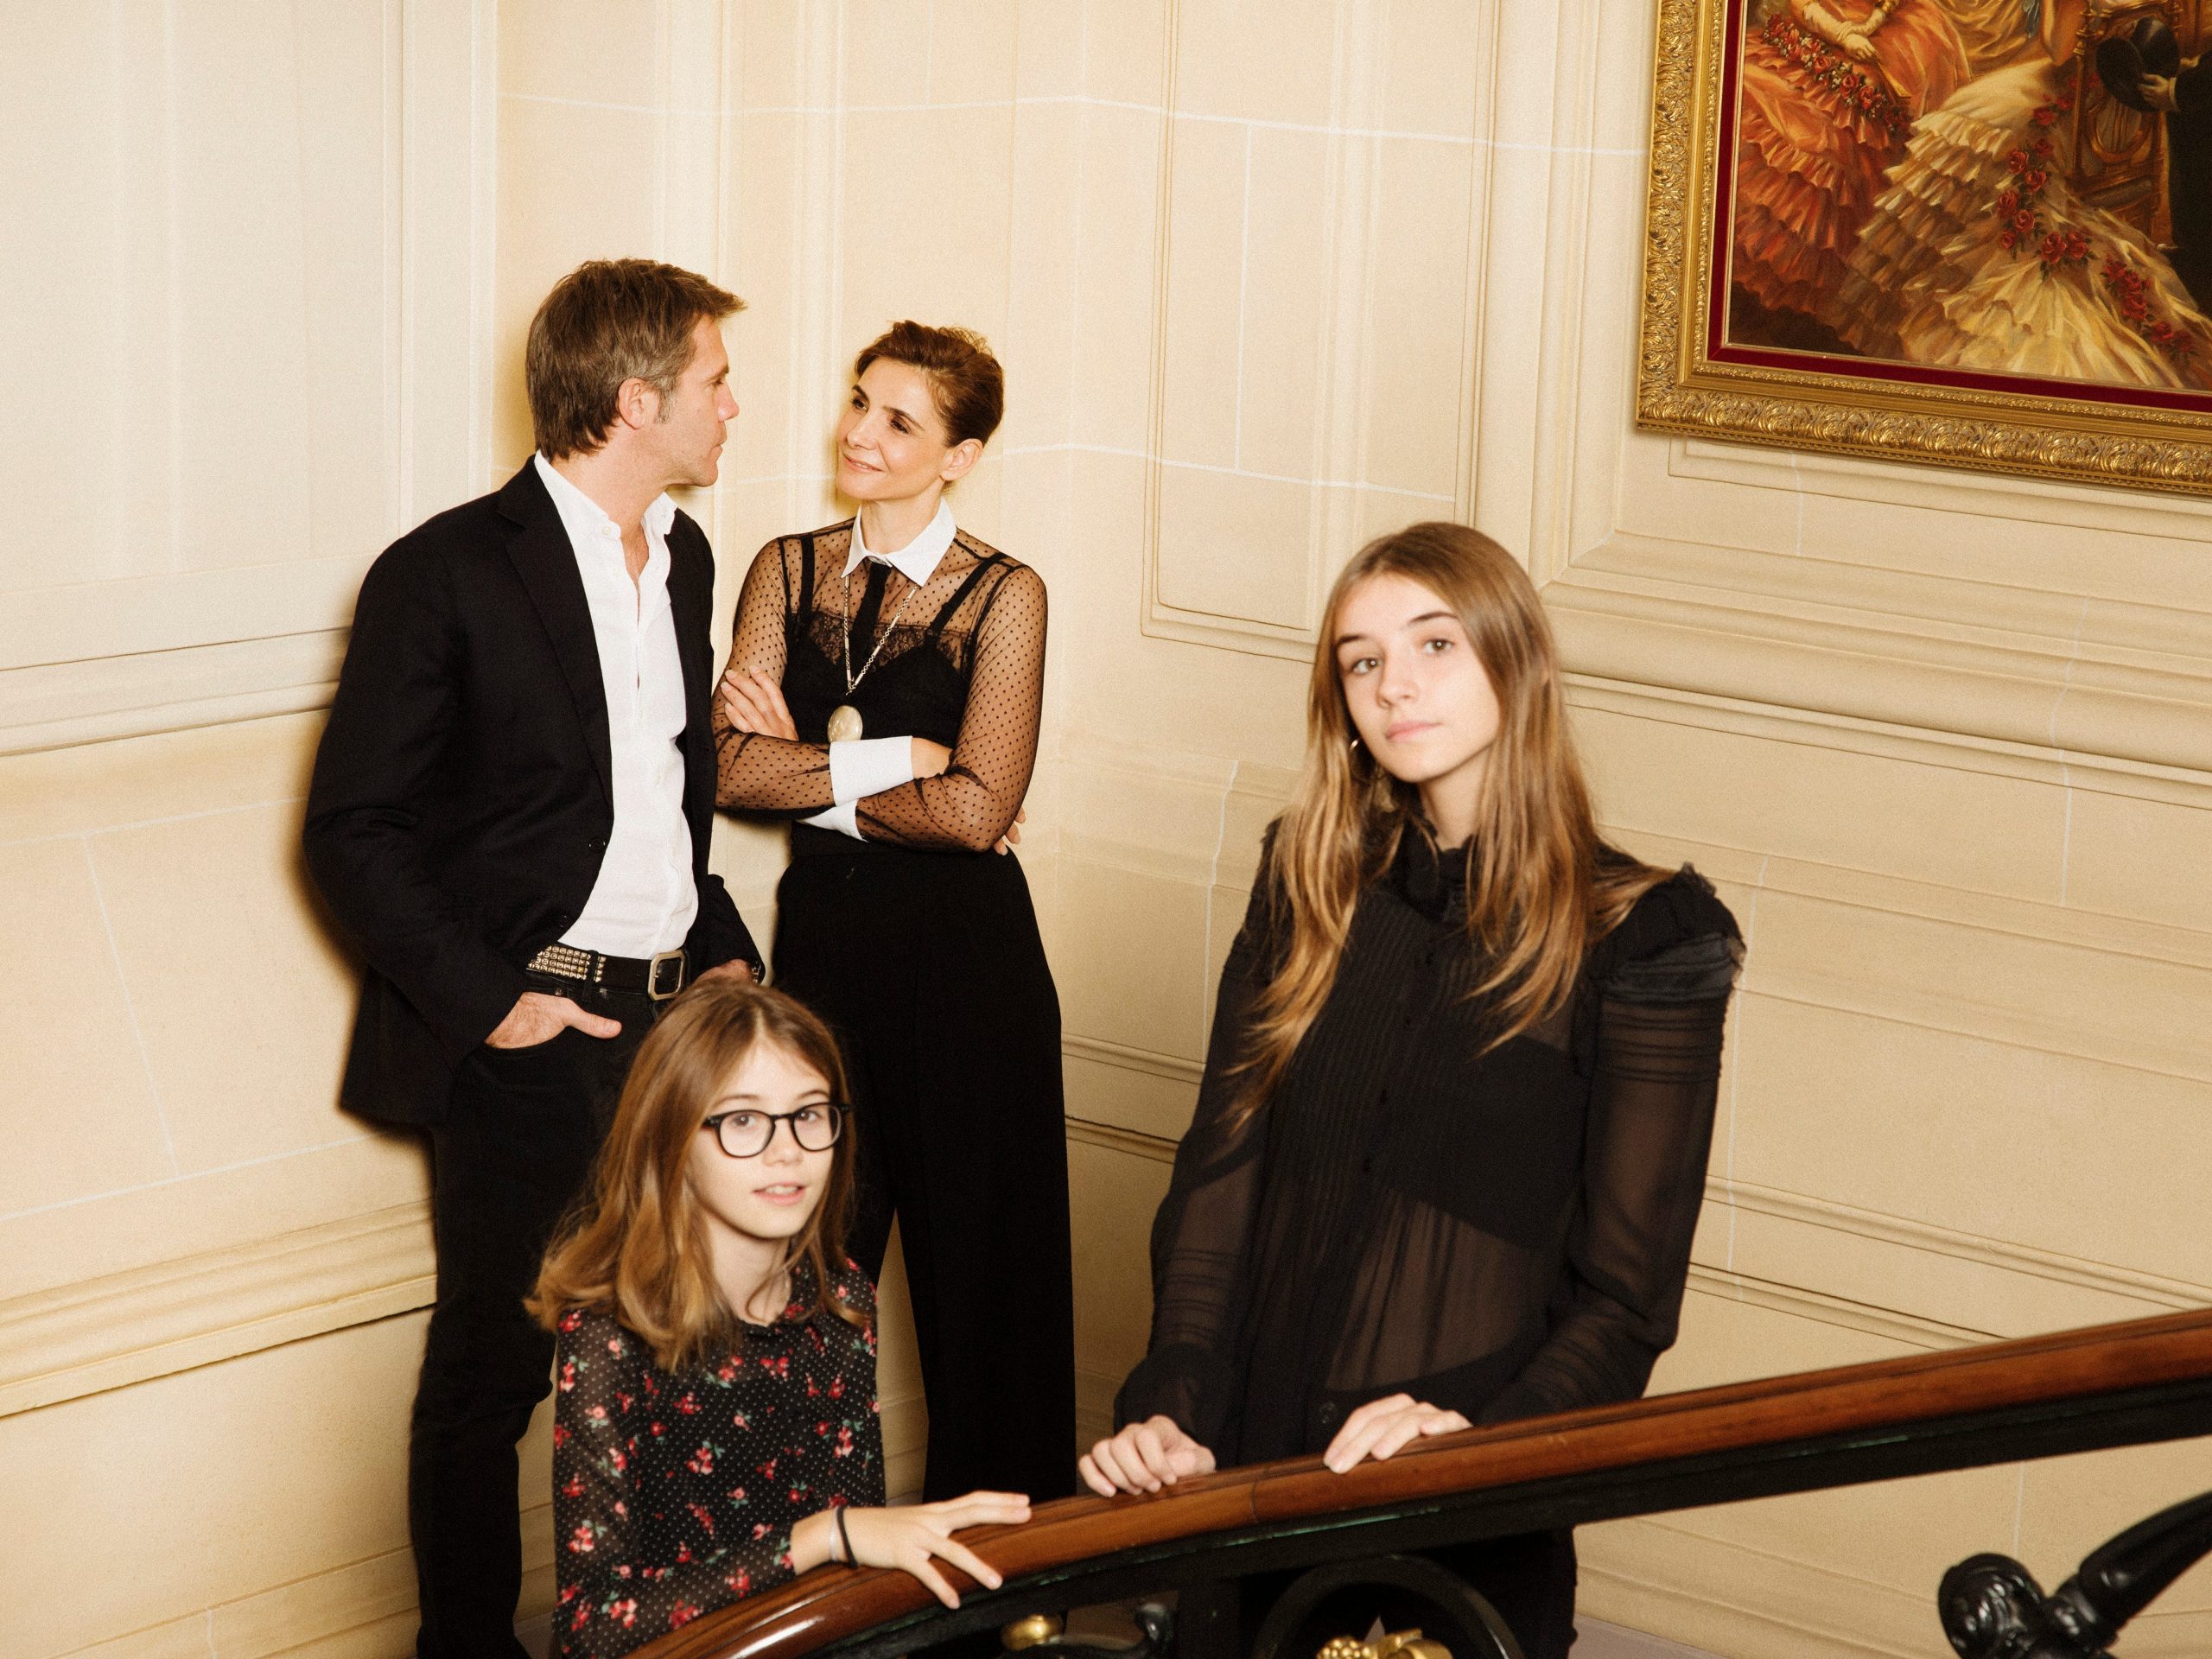 Emanuele Filiberto of Savoy, Prince of Venice, with wife Clotilde Courau and daughters Luisa and Vittoria.